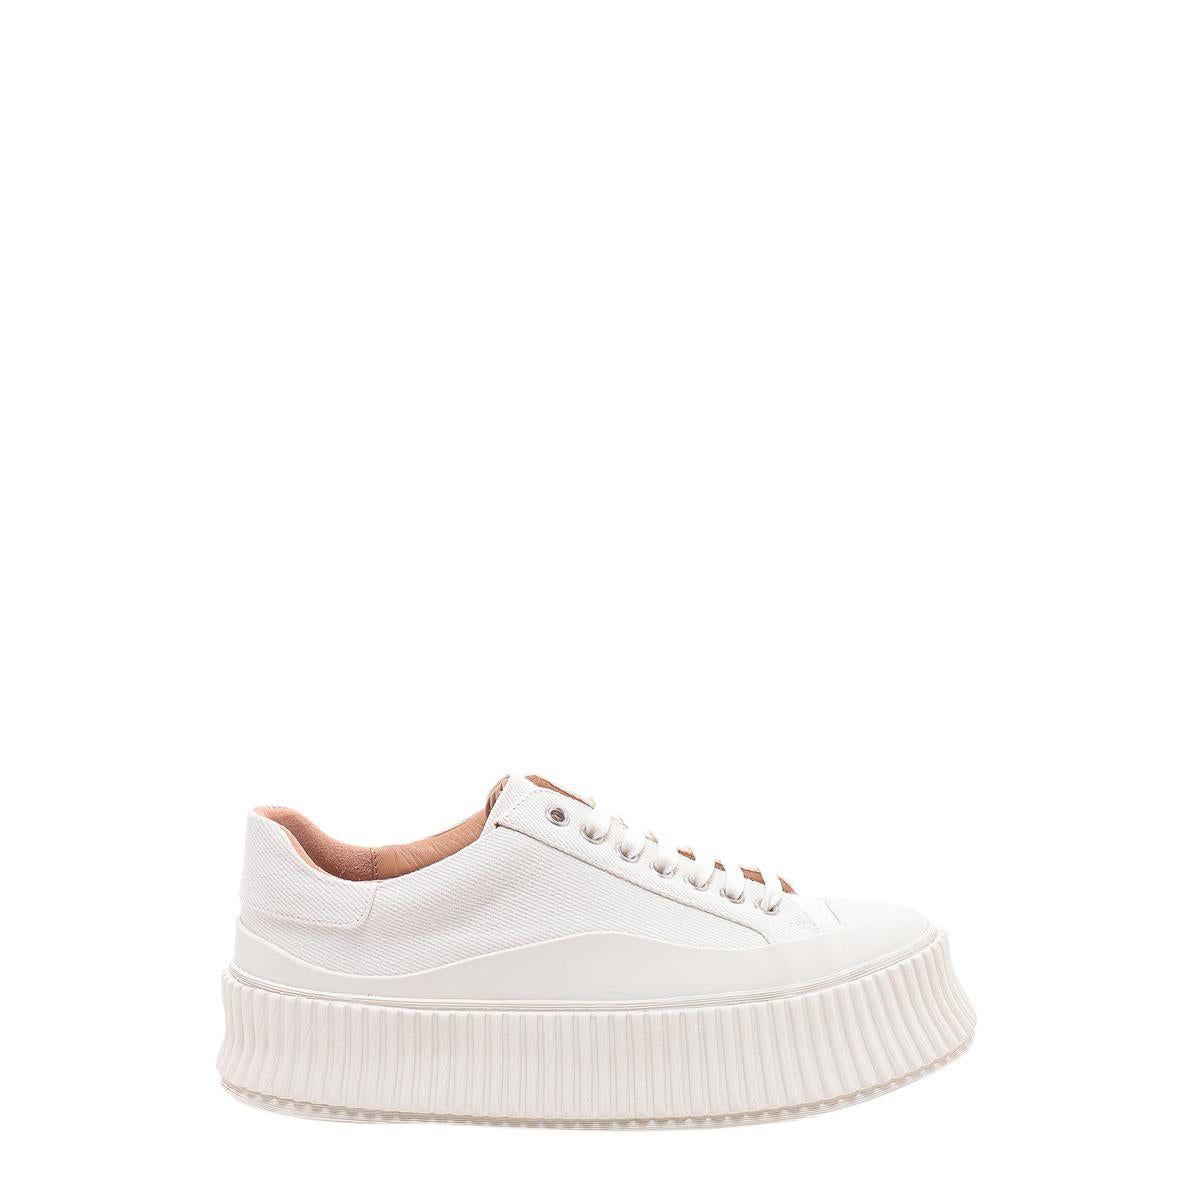 Jil Sander Leather Lace-up Sneakers in White | Lyst